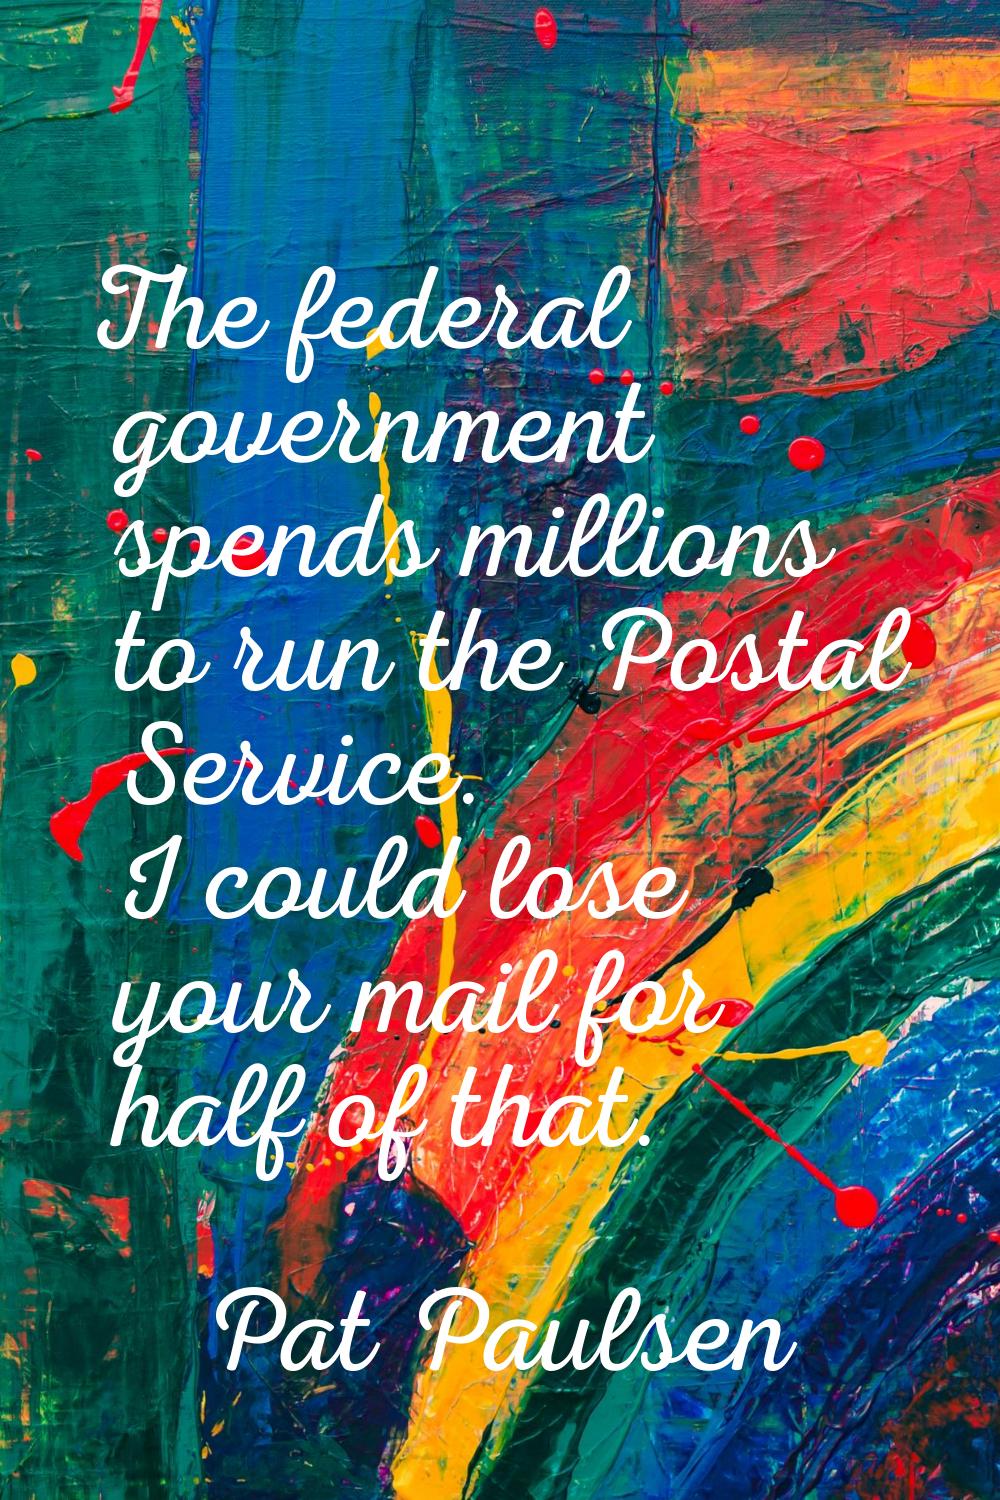 The federal government spends millions to run the Postal Service. I could lose your mail for half o